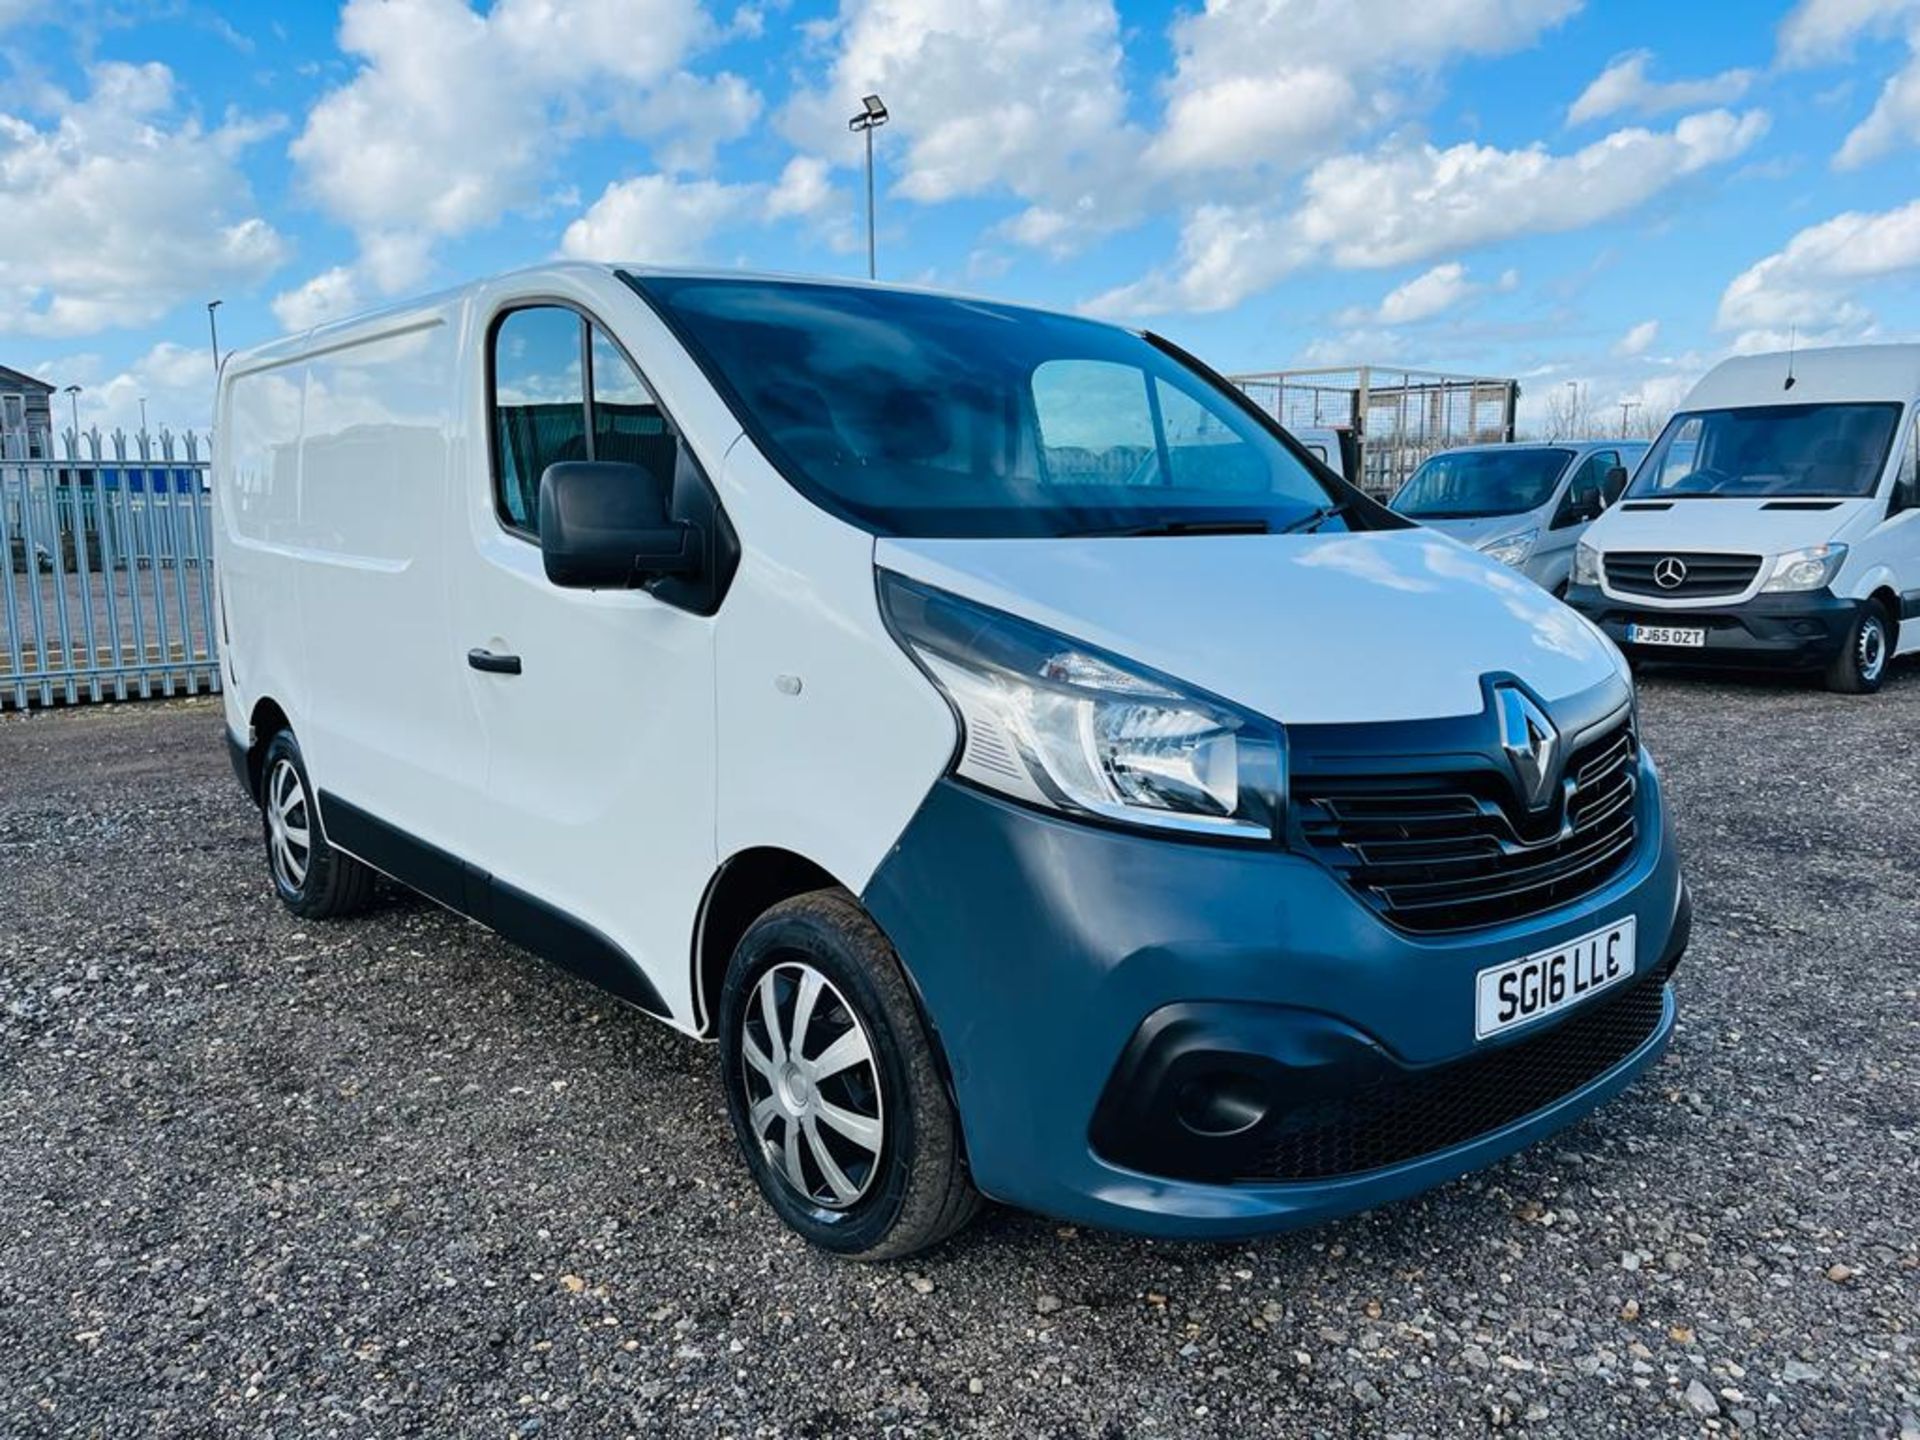 ** ON SALE ** Renault Trafic SL27 Business + 1.6 DCI 115 L1 H1 2016 '16 Reg' -A/C- Only 69794 Miles